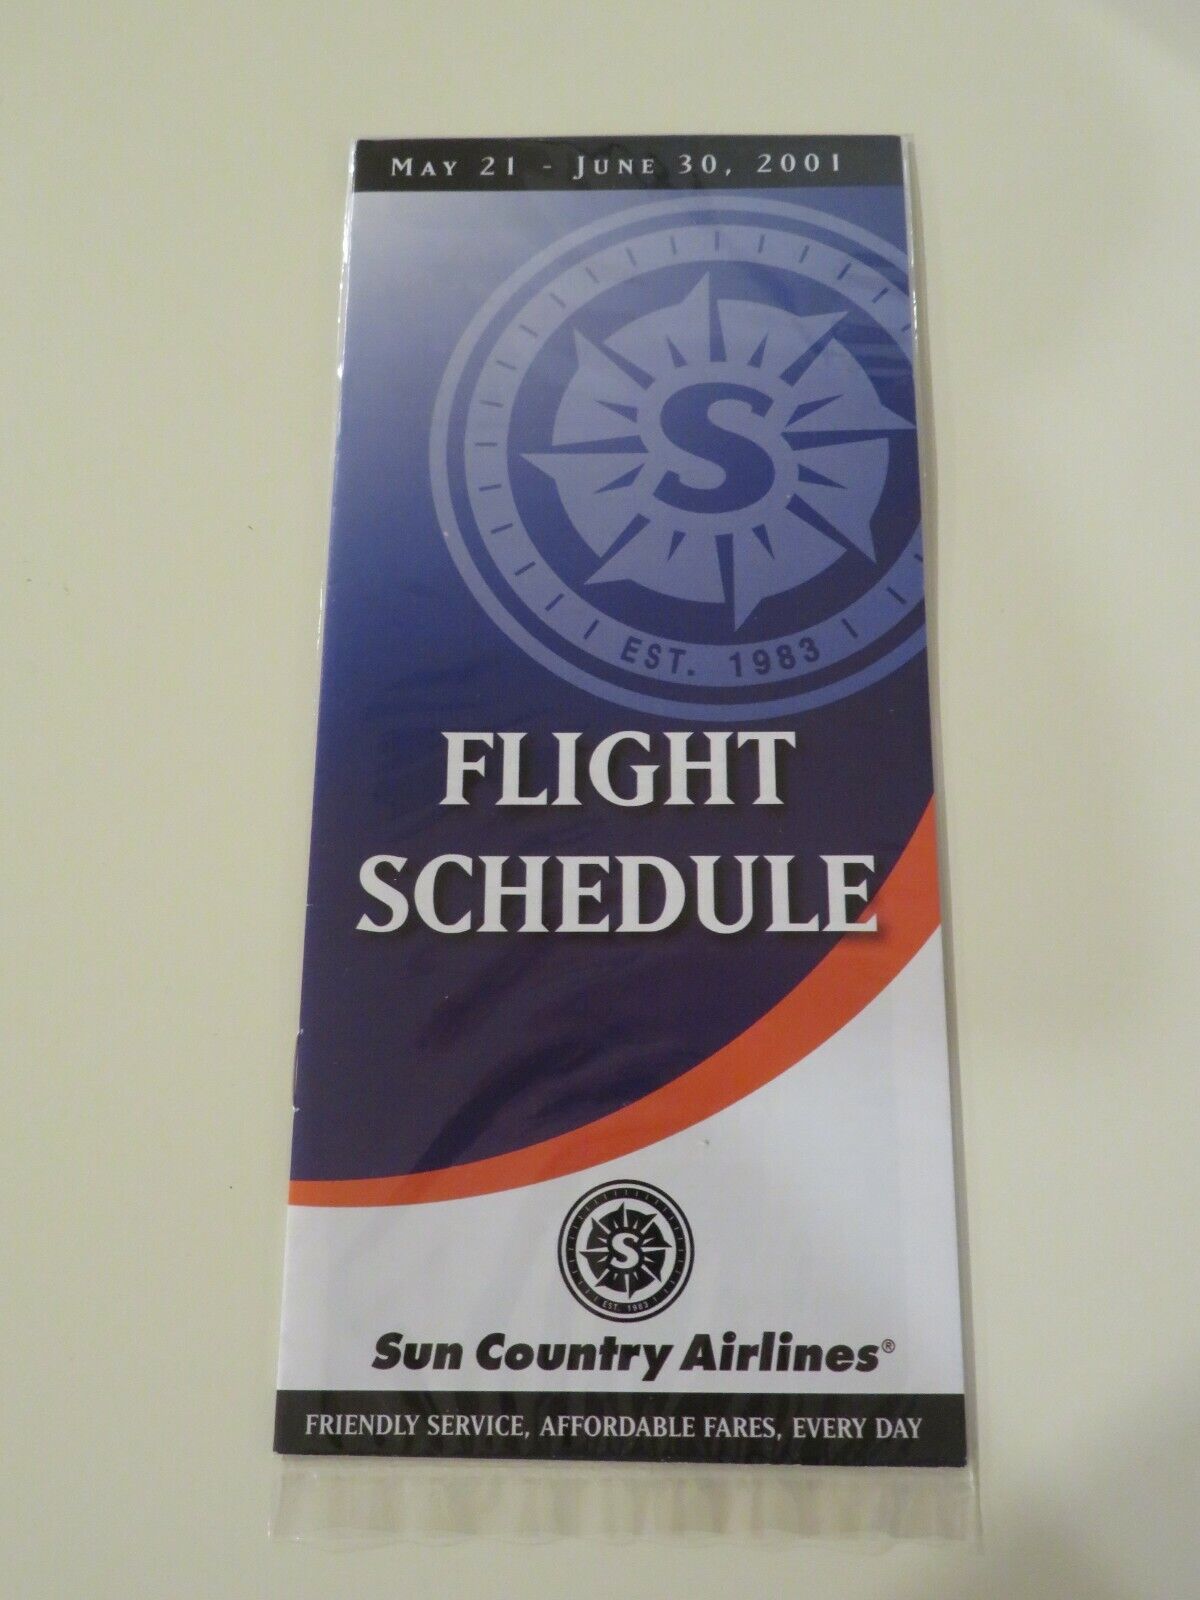 Sun Country Airlines Timetable  May 21, 2001 =